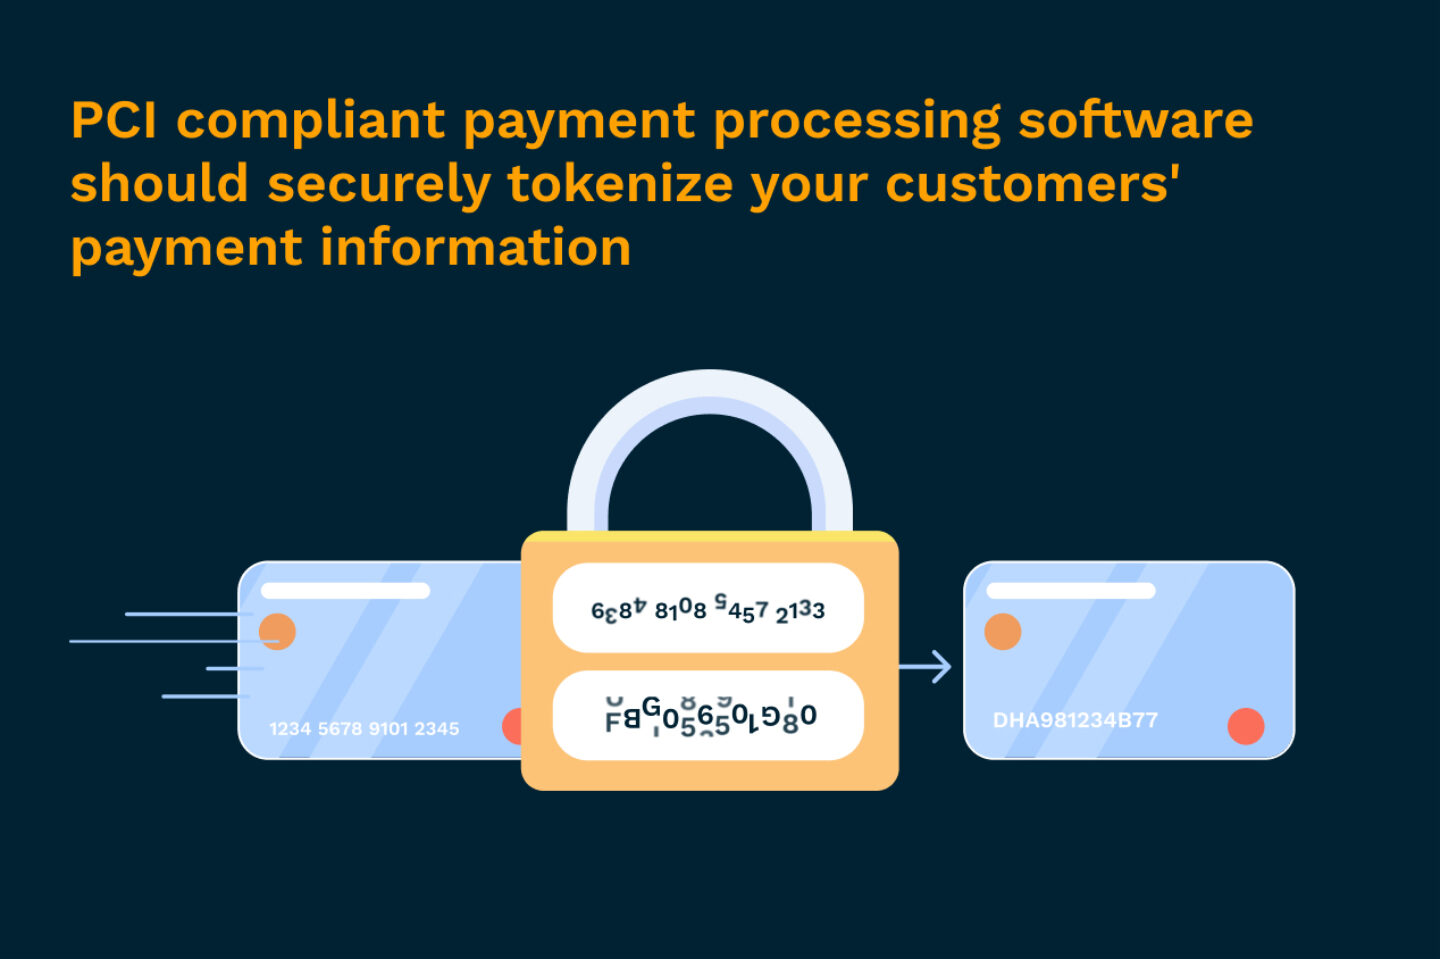 PCI compliance: PCI compliant payment processing software should securely tokenize your customers' payment information